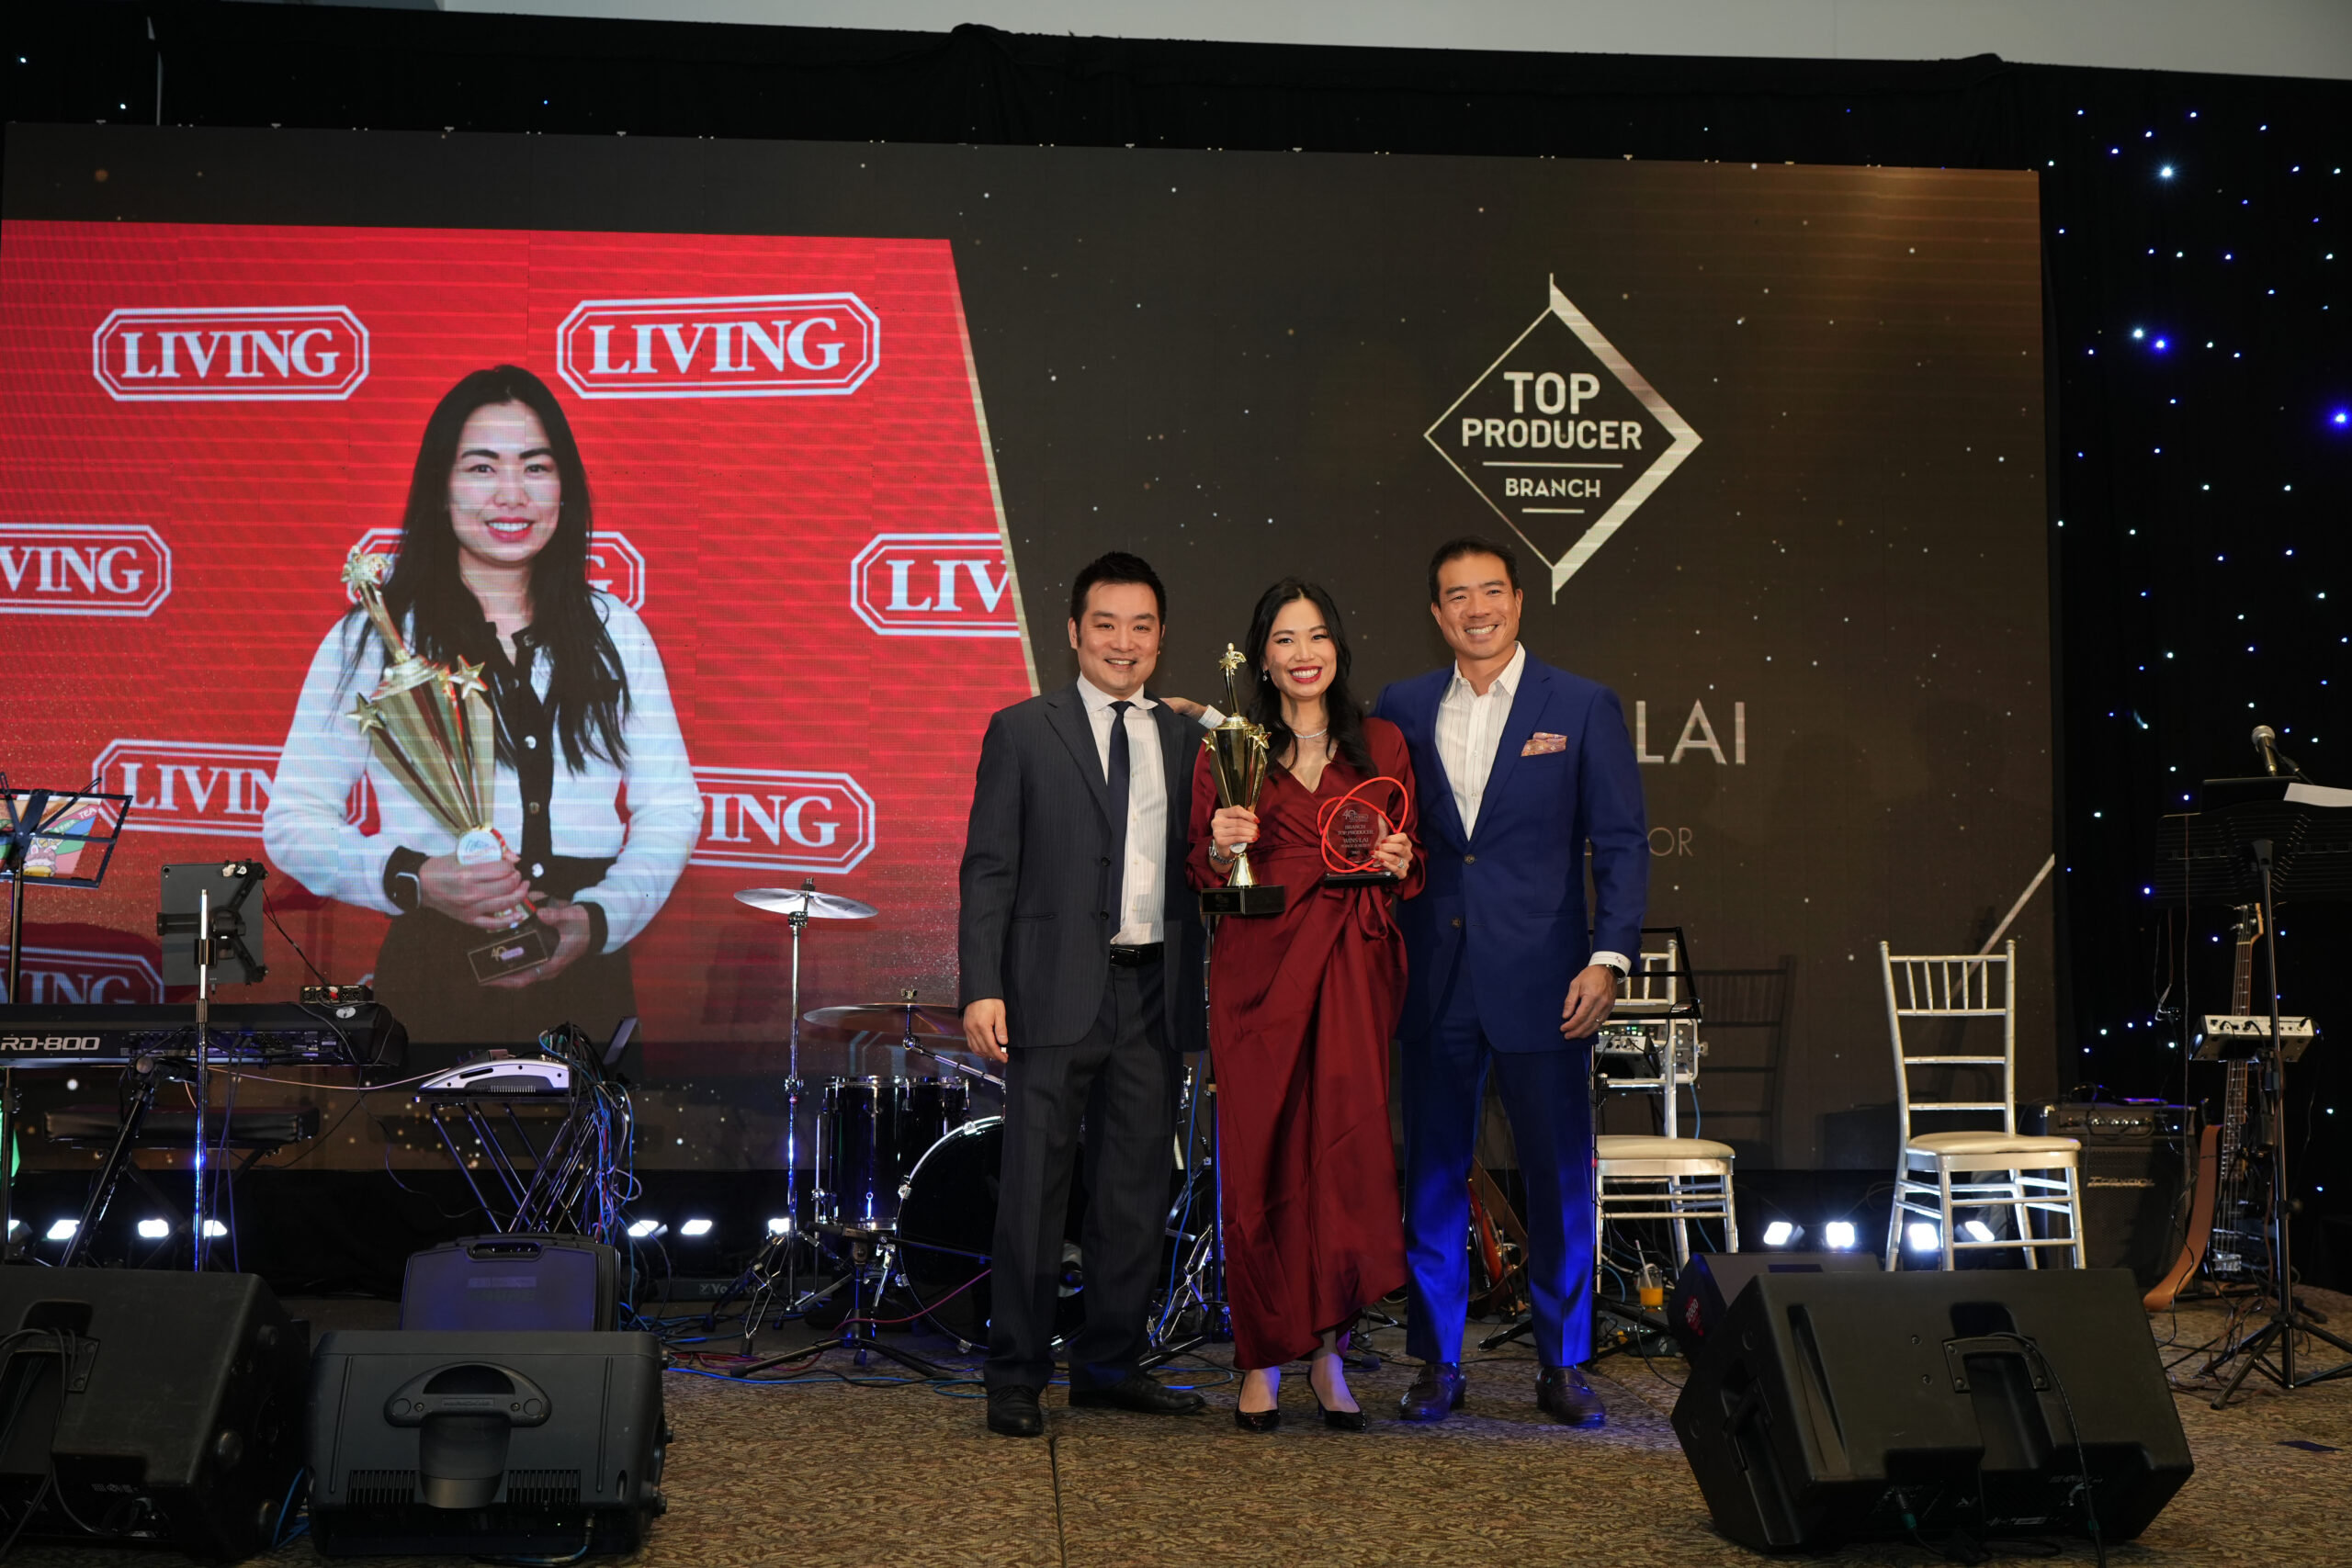 Wins Lai receiving Top Producer award from Living Realty.